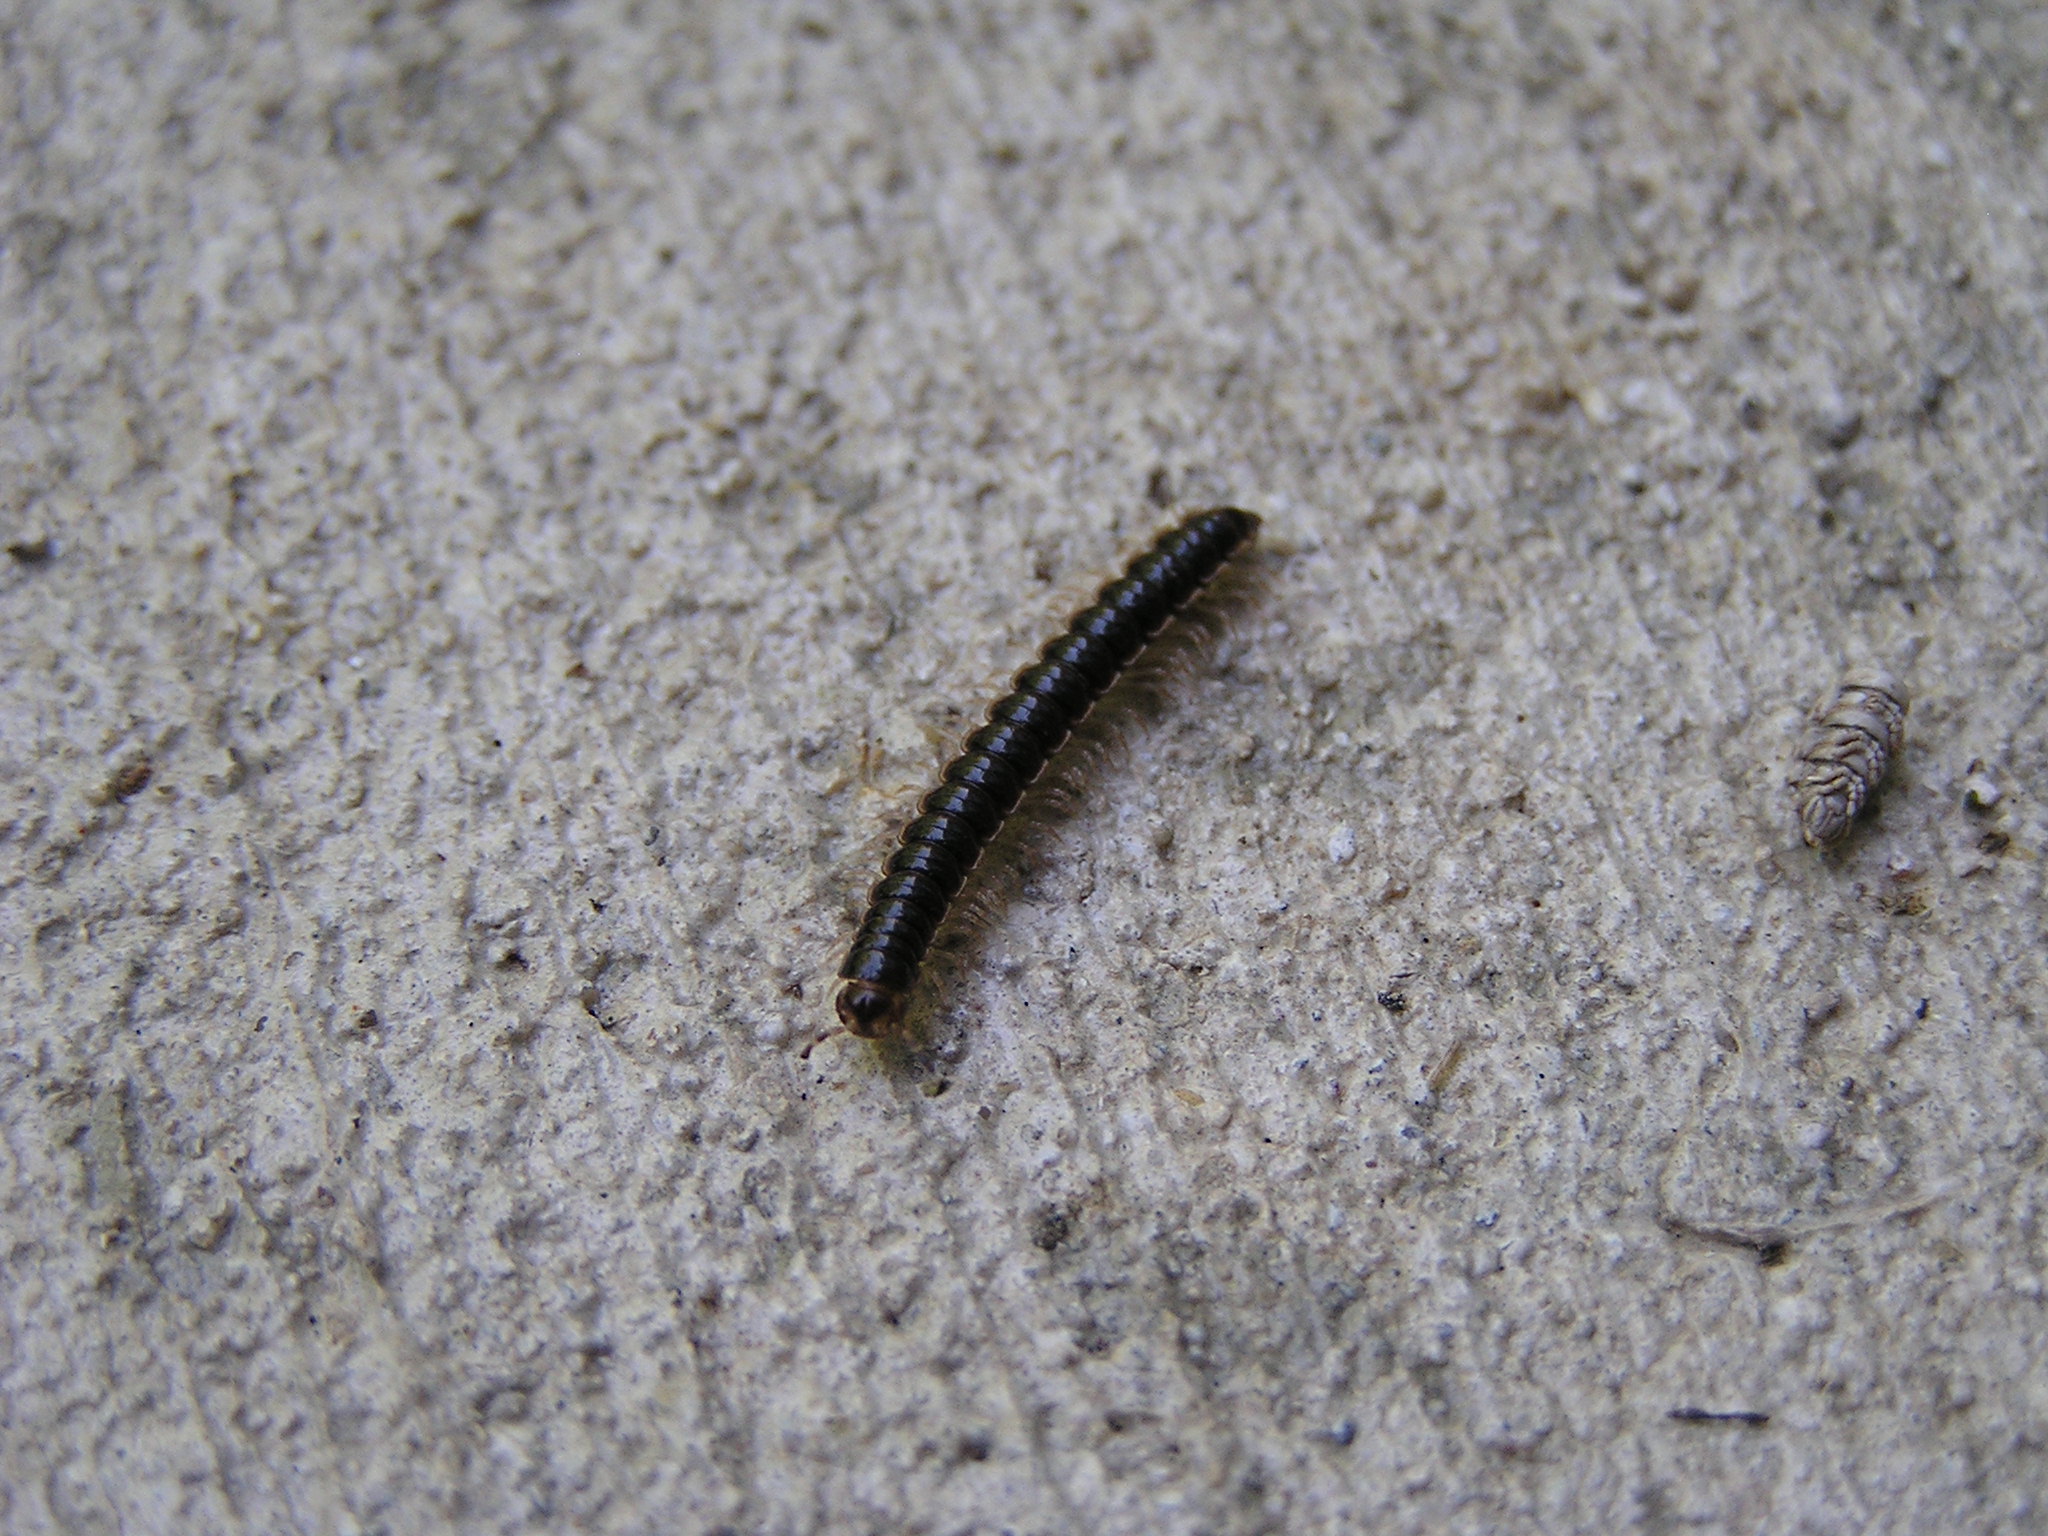 Last summer our house was overrun by the caterpillar(?) shown in the ...